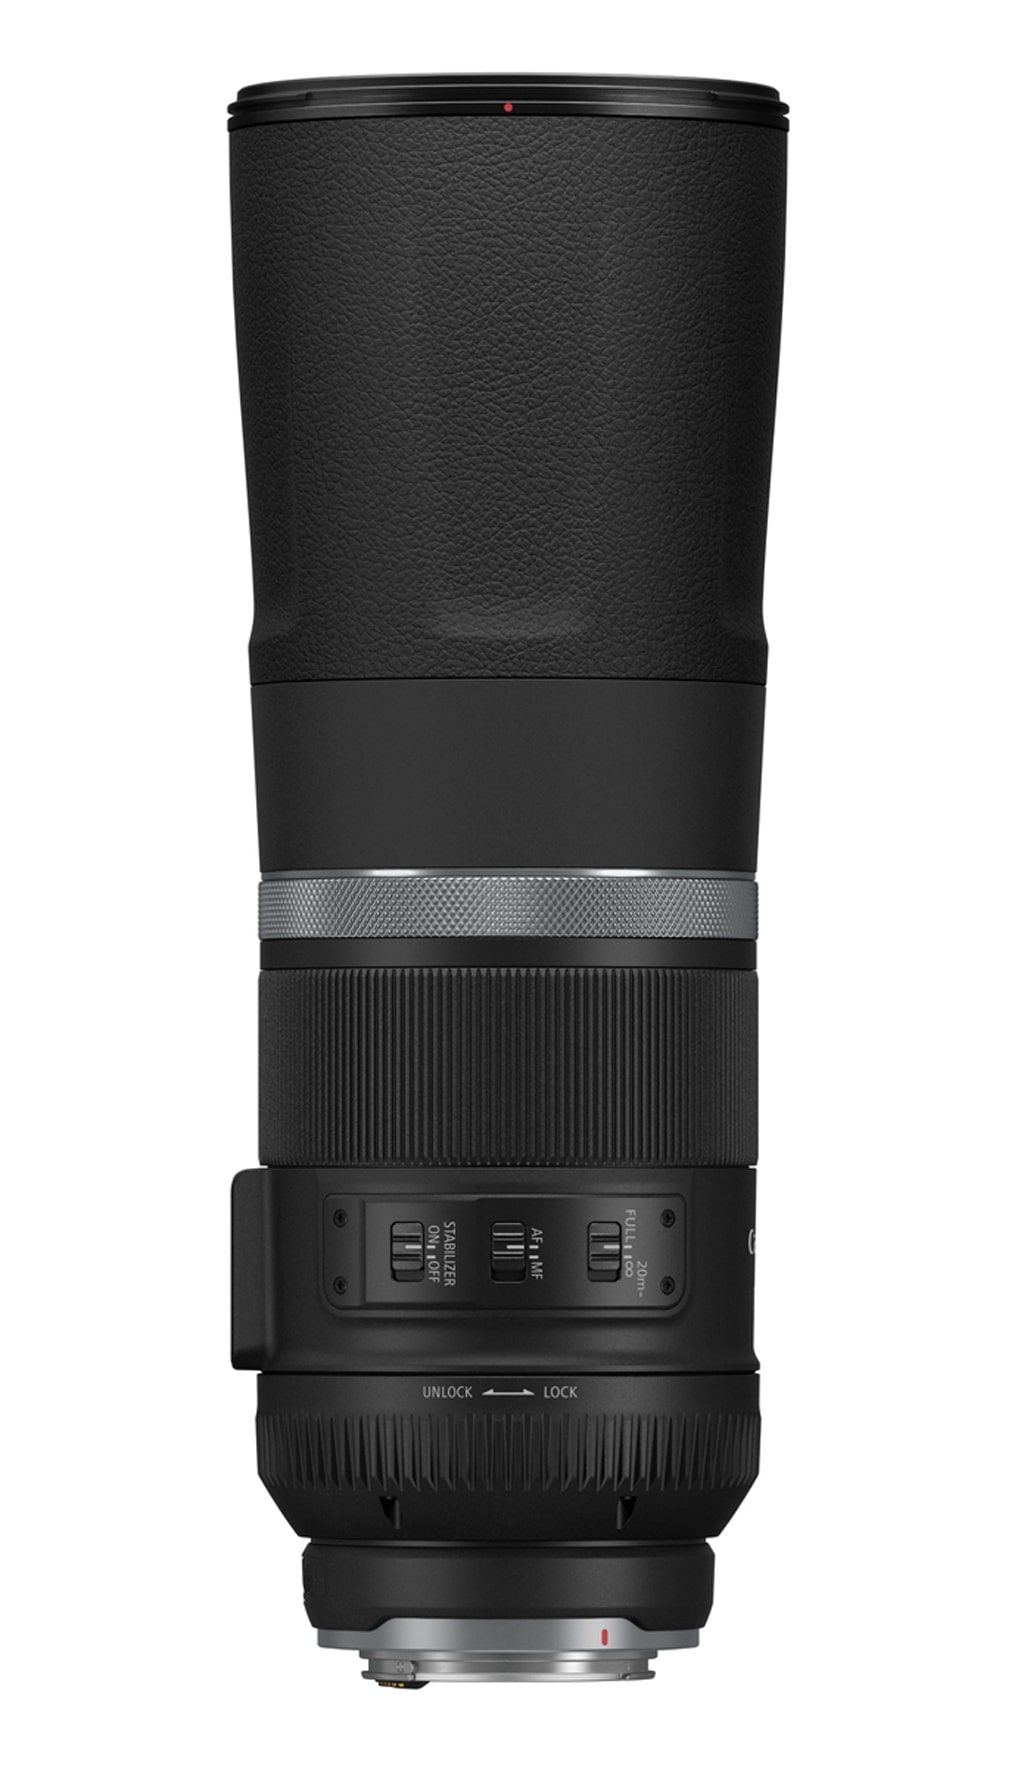 Canon RF 800mm 1:11 IS STM